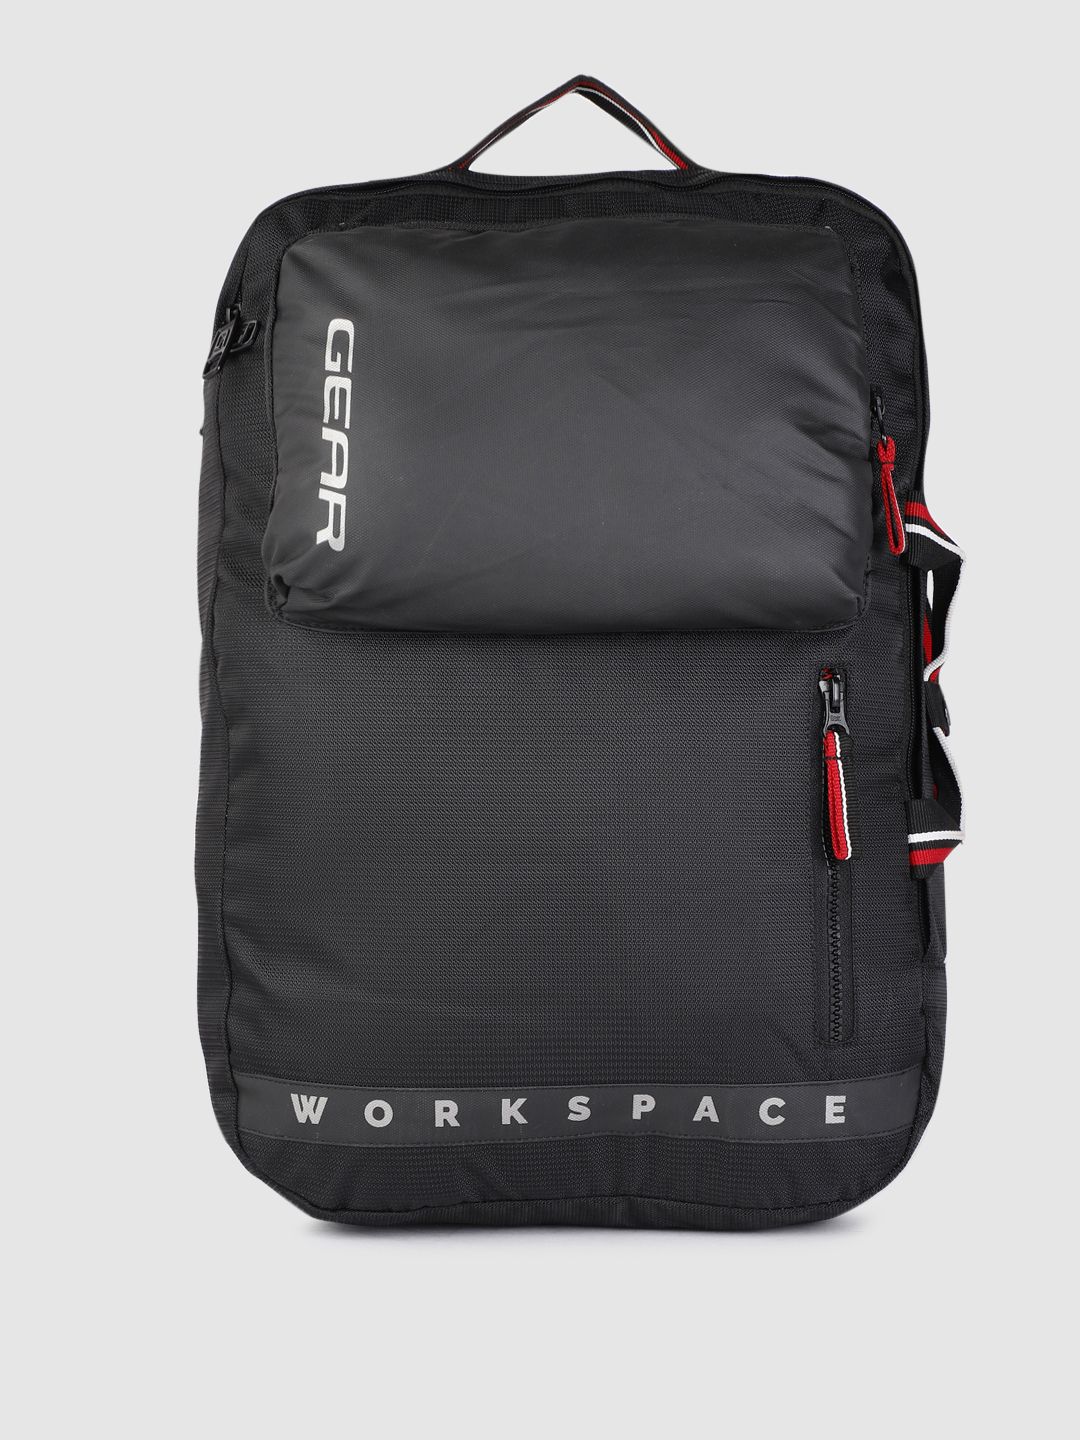 Gear Unisex Black Solid Workspace Hybrid Briefcase Backpack Price in India